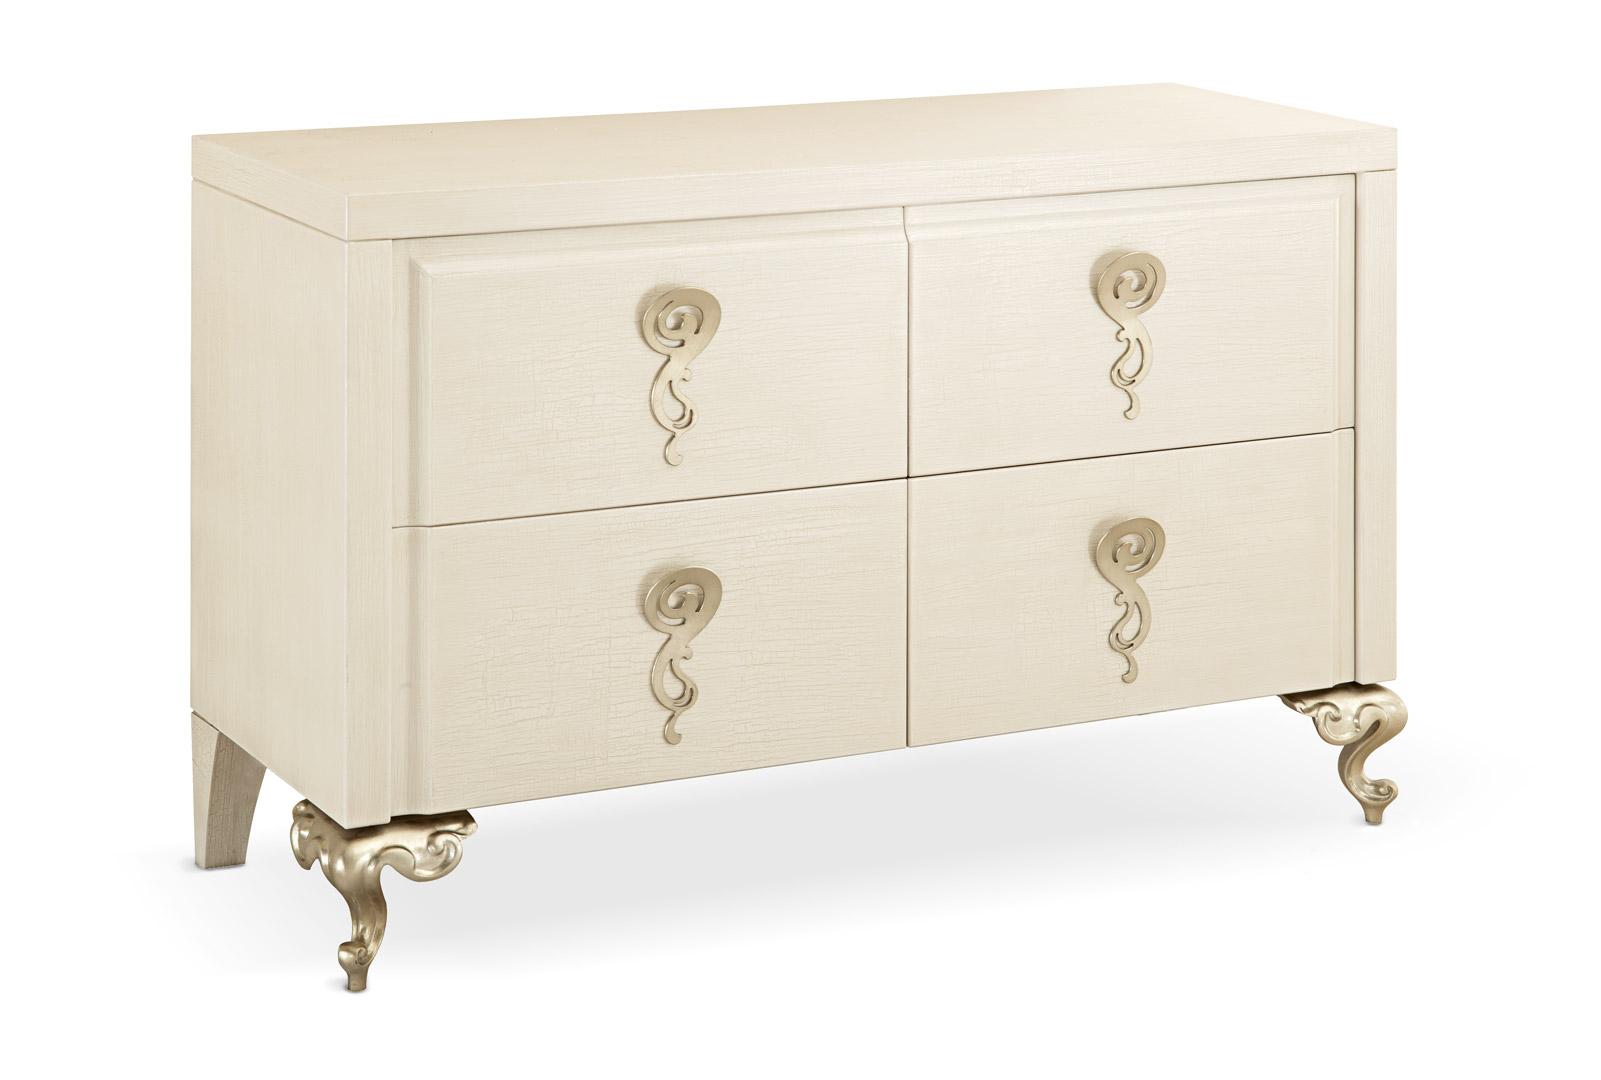 George chest of drawers - Cantori